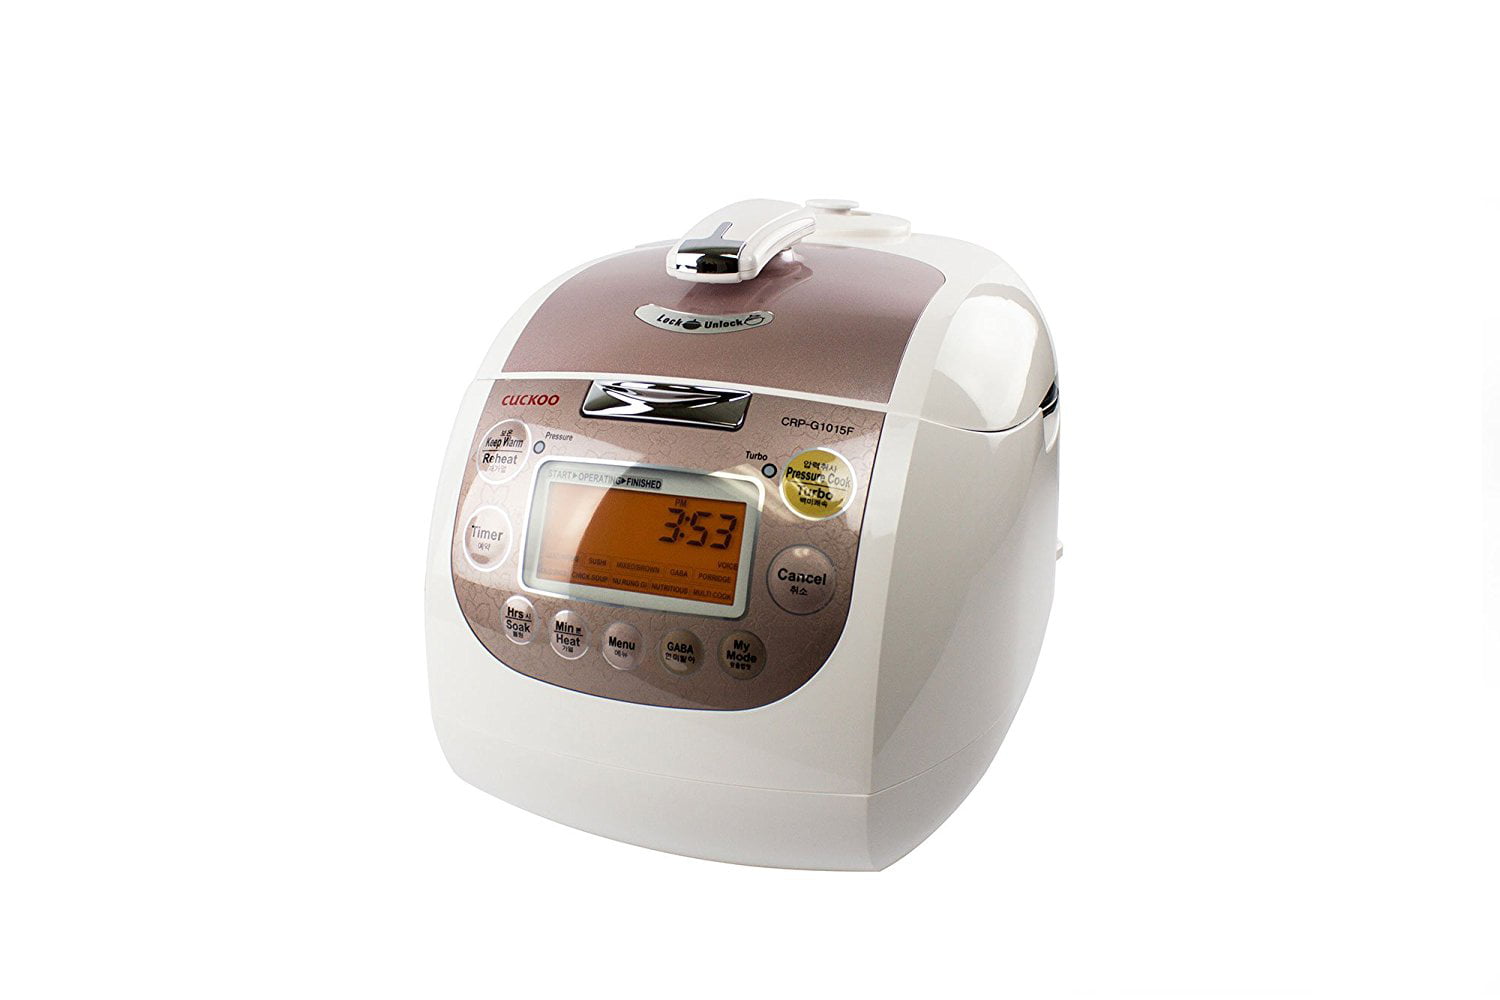 CRP-G1015F 10 Cup Electric Pressure Rice Cooker, 110v, Pink